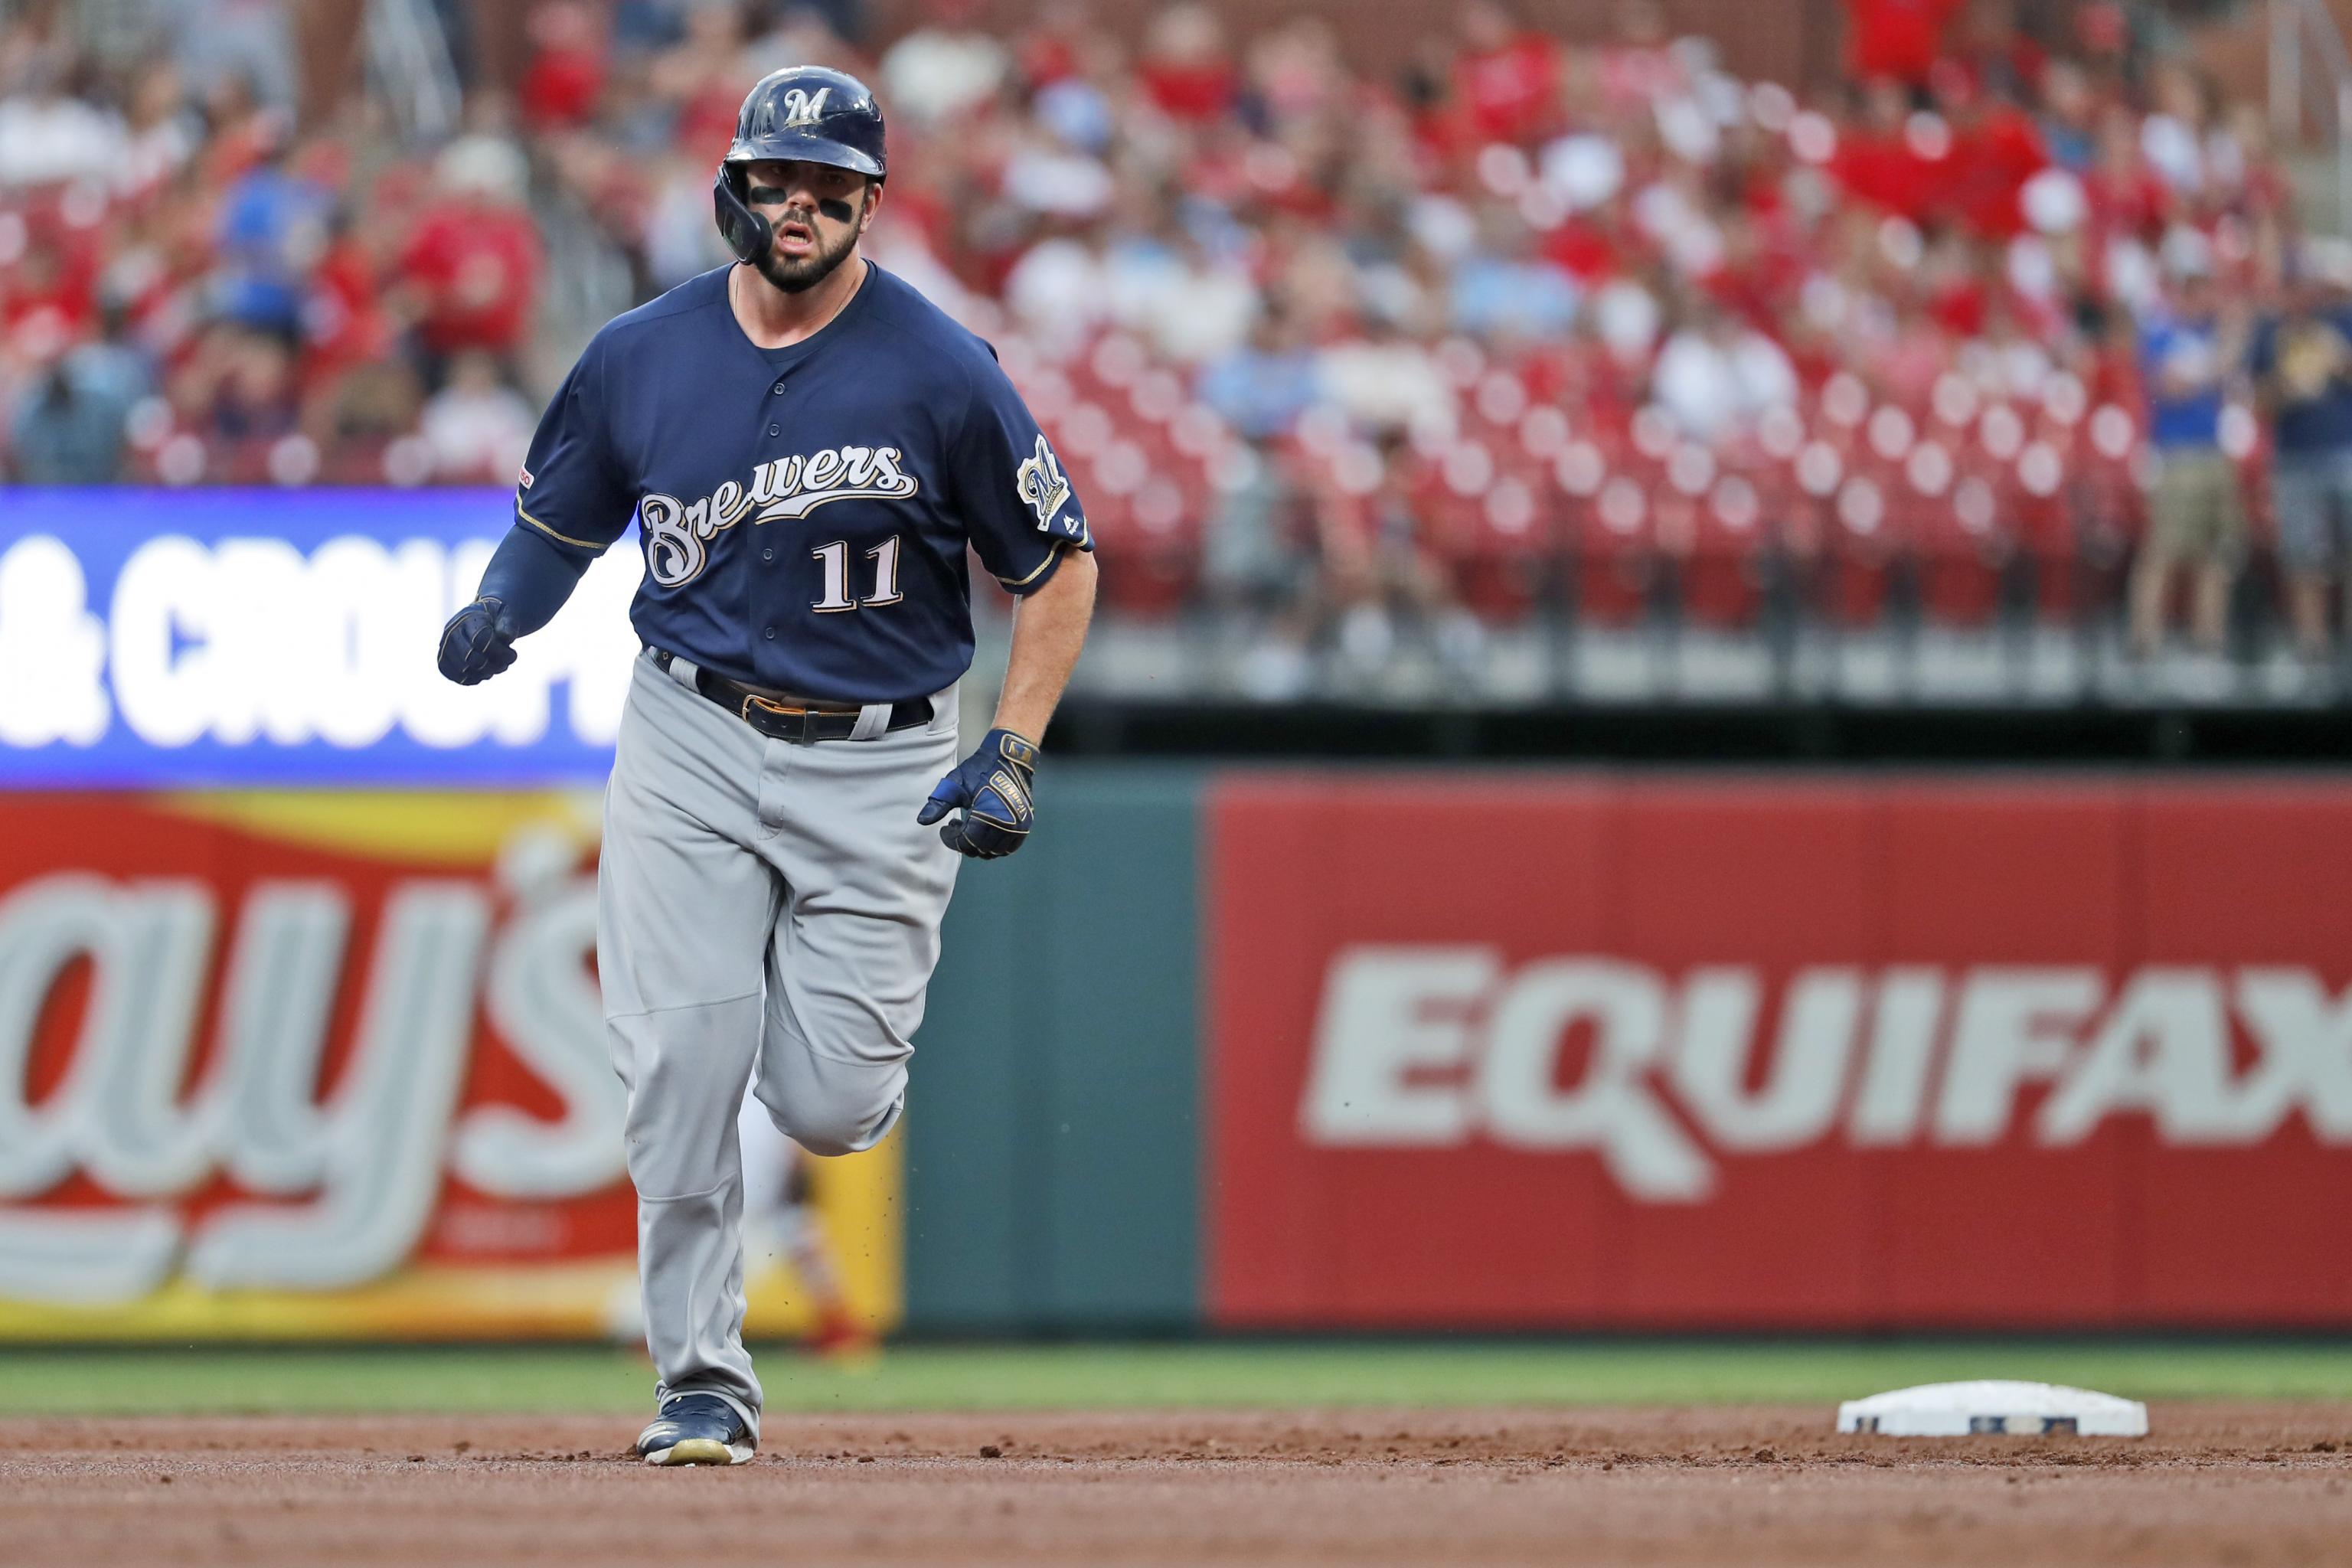 The Reds have gauged interest in trading Mike Moustakas - Redleg Nation